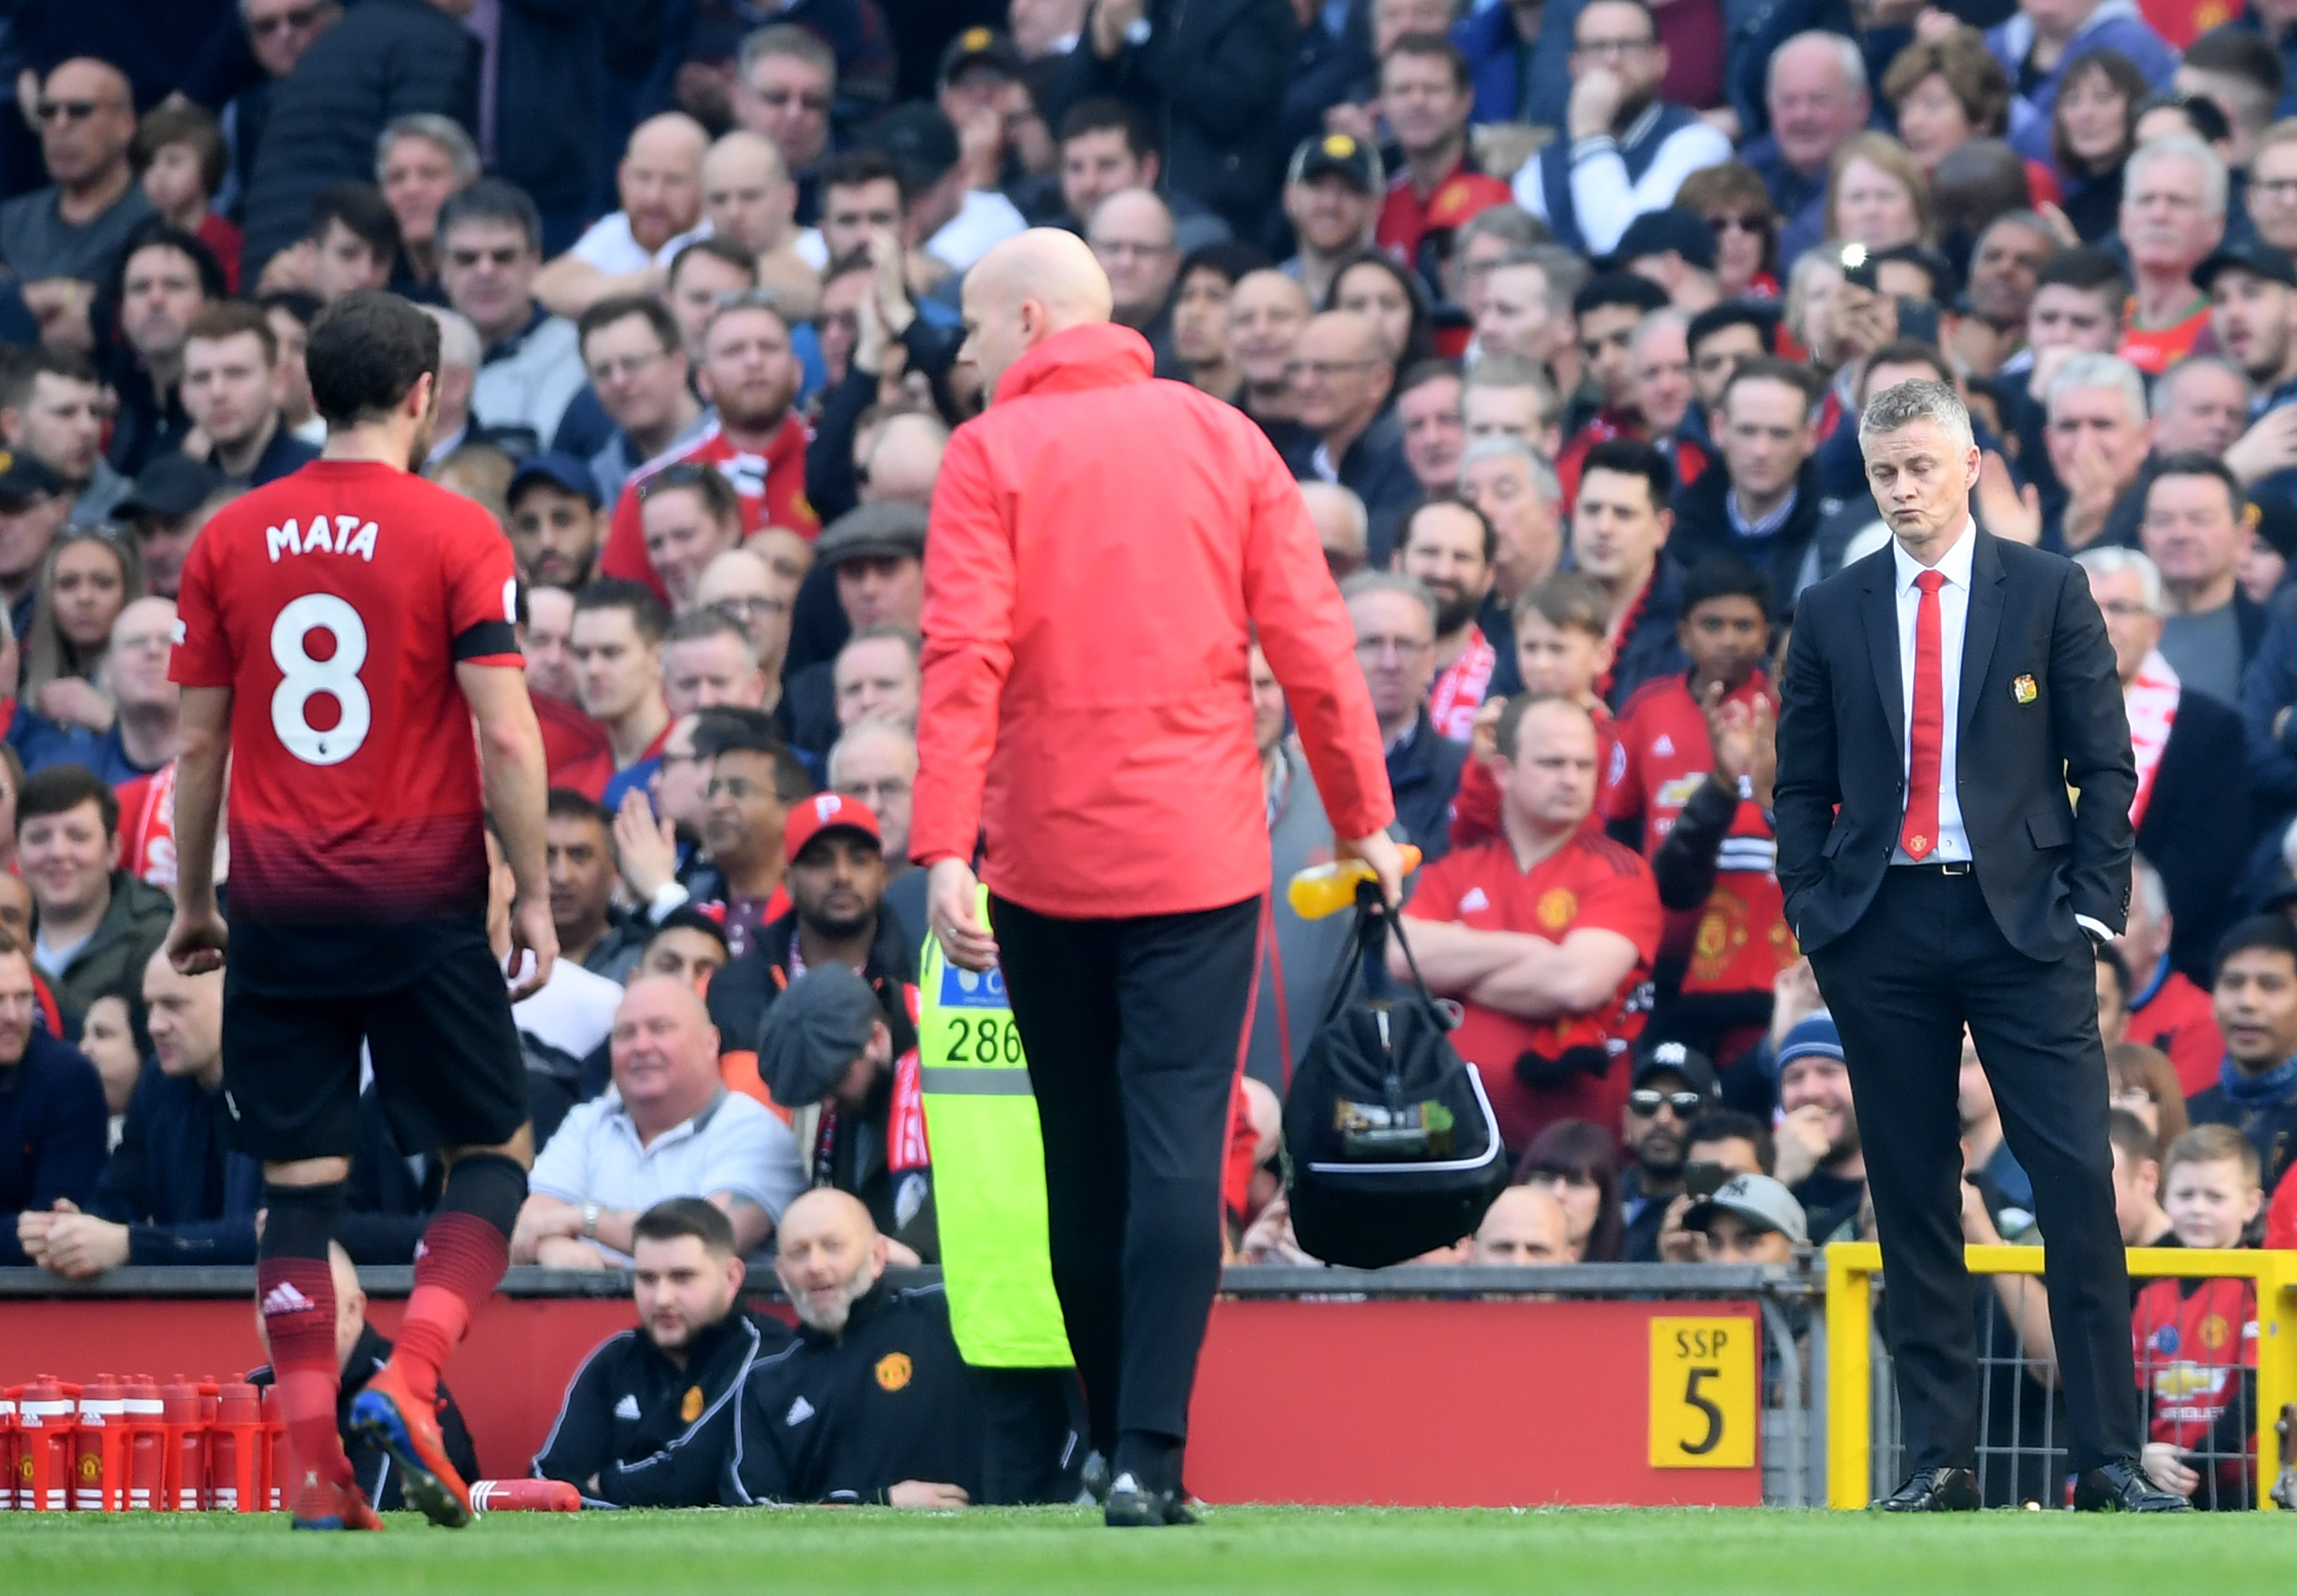 MANCHESTER, ENGLAND - FEBRUARY 24:  Ole Gunnar Solskjaer, Interim Manager of Manchester United reacts as Juan Mata of Manchester United leaves the pitch due to injury during the Premier League match between Manchester United and Liverpool FC at Old Trafford on February 24, 2019 in Manchester, United Kingdom.  (Photo by Laurence Griffiths/Getty Images)